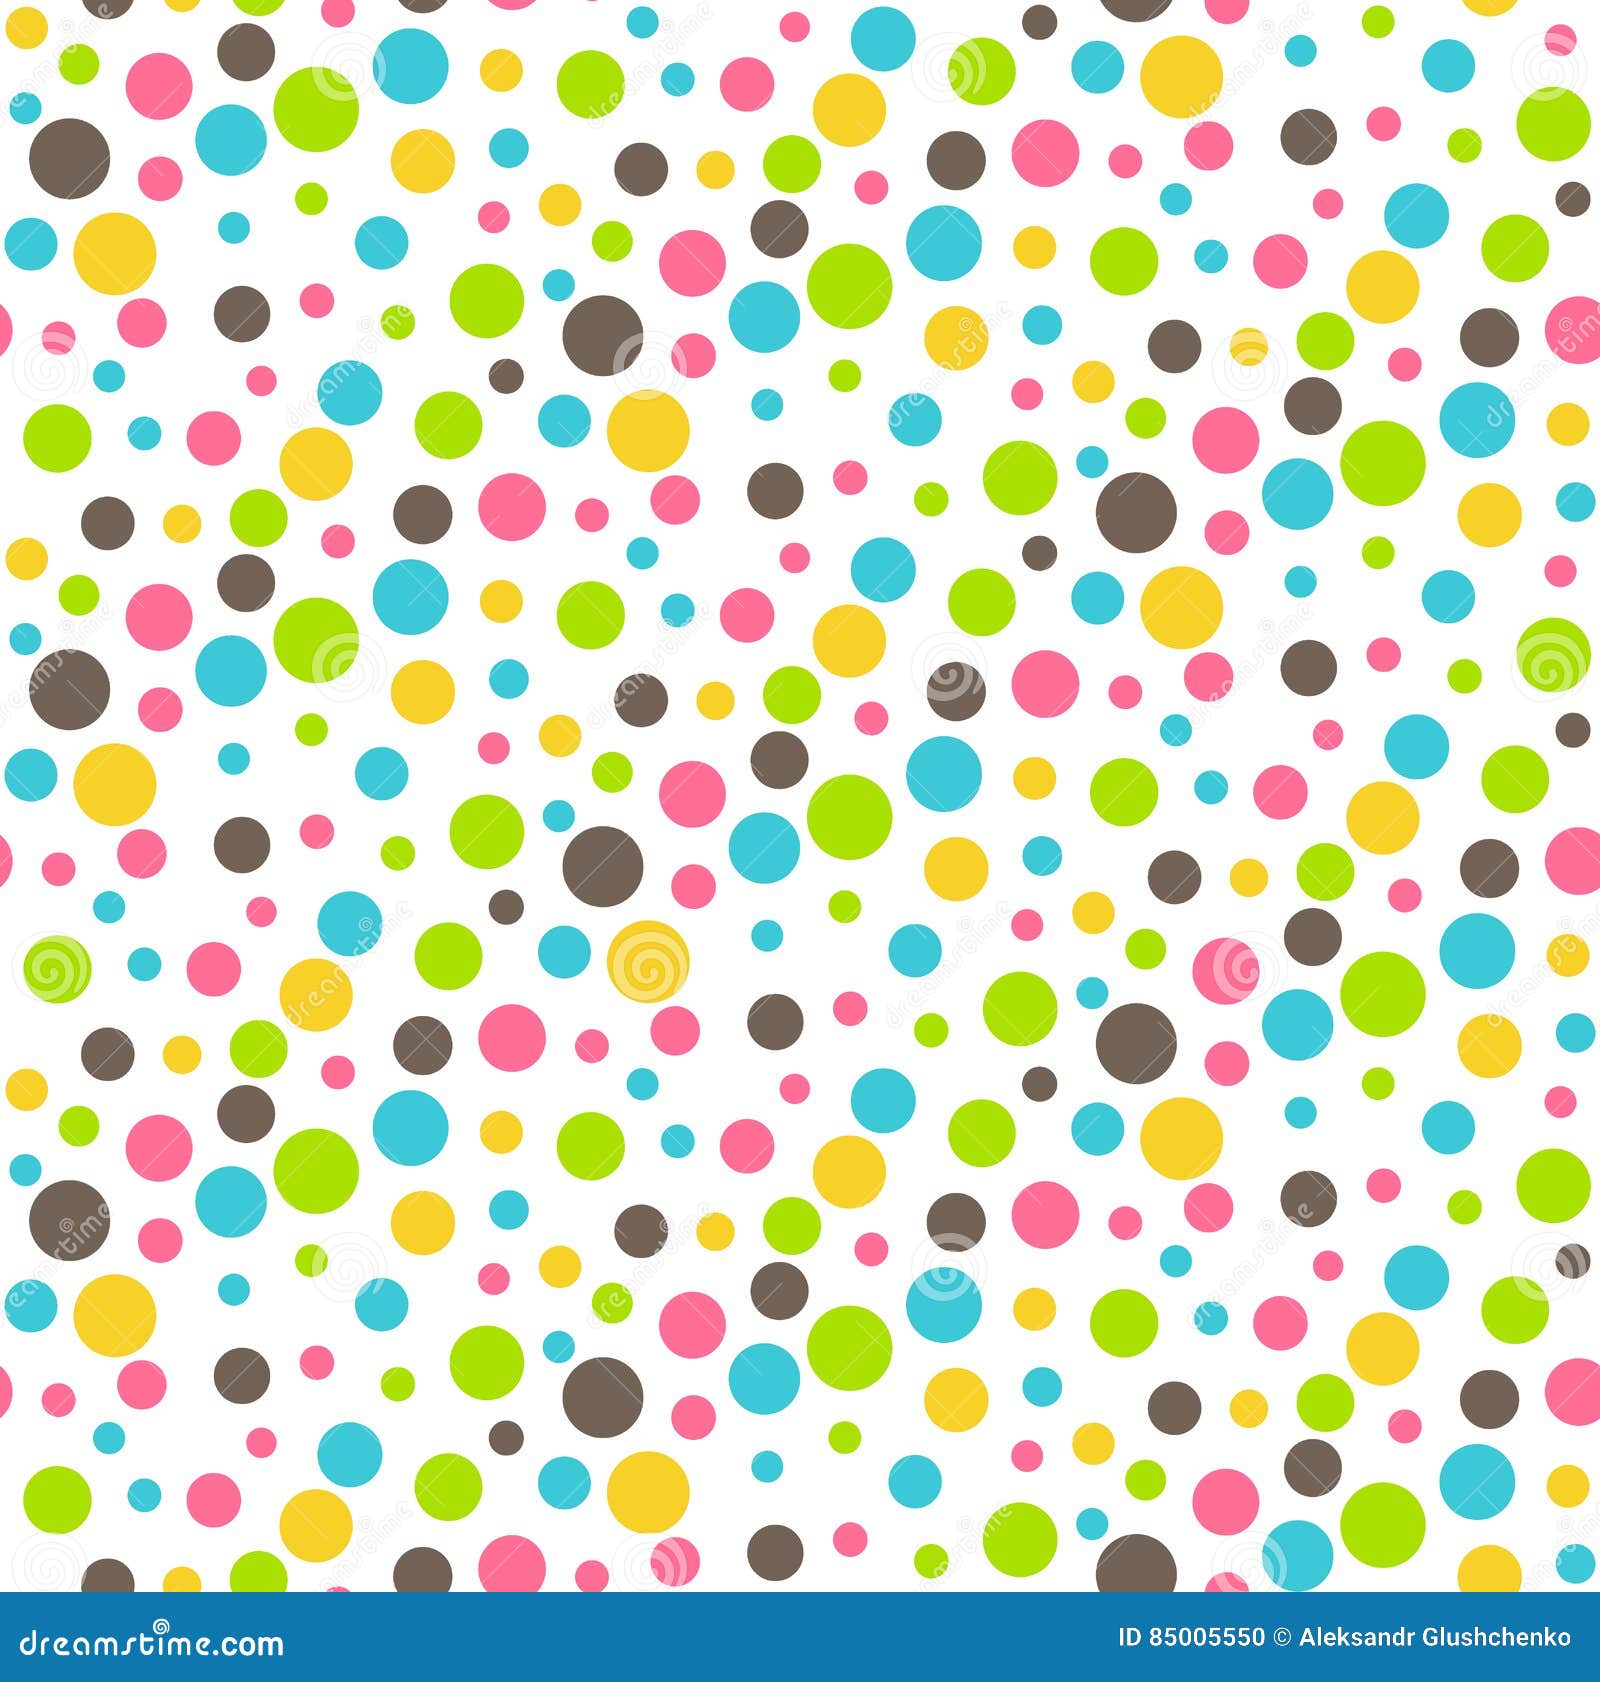 Seamless Bright Abstract Dots Chaos Pattern Stock Vector - Illustration ...